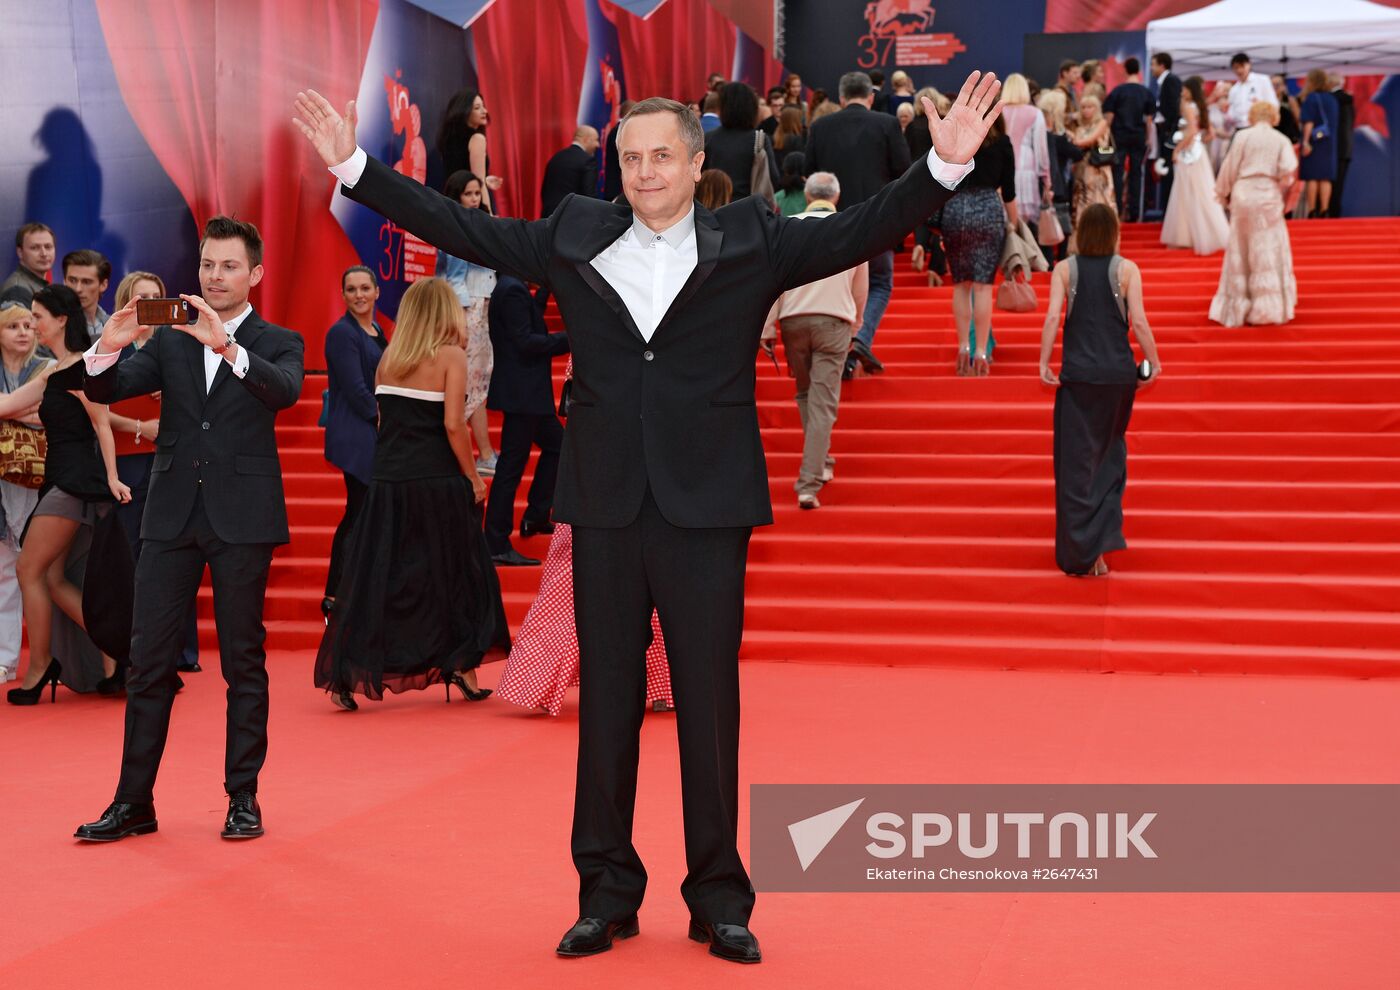 37th International Film Festival opens in Moscow